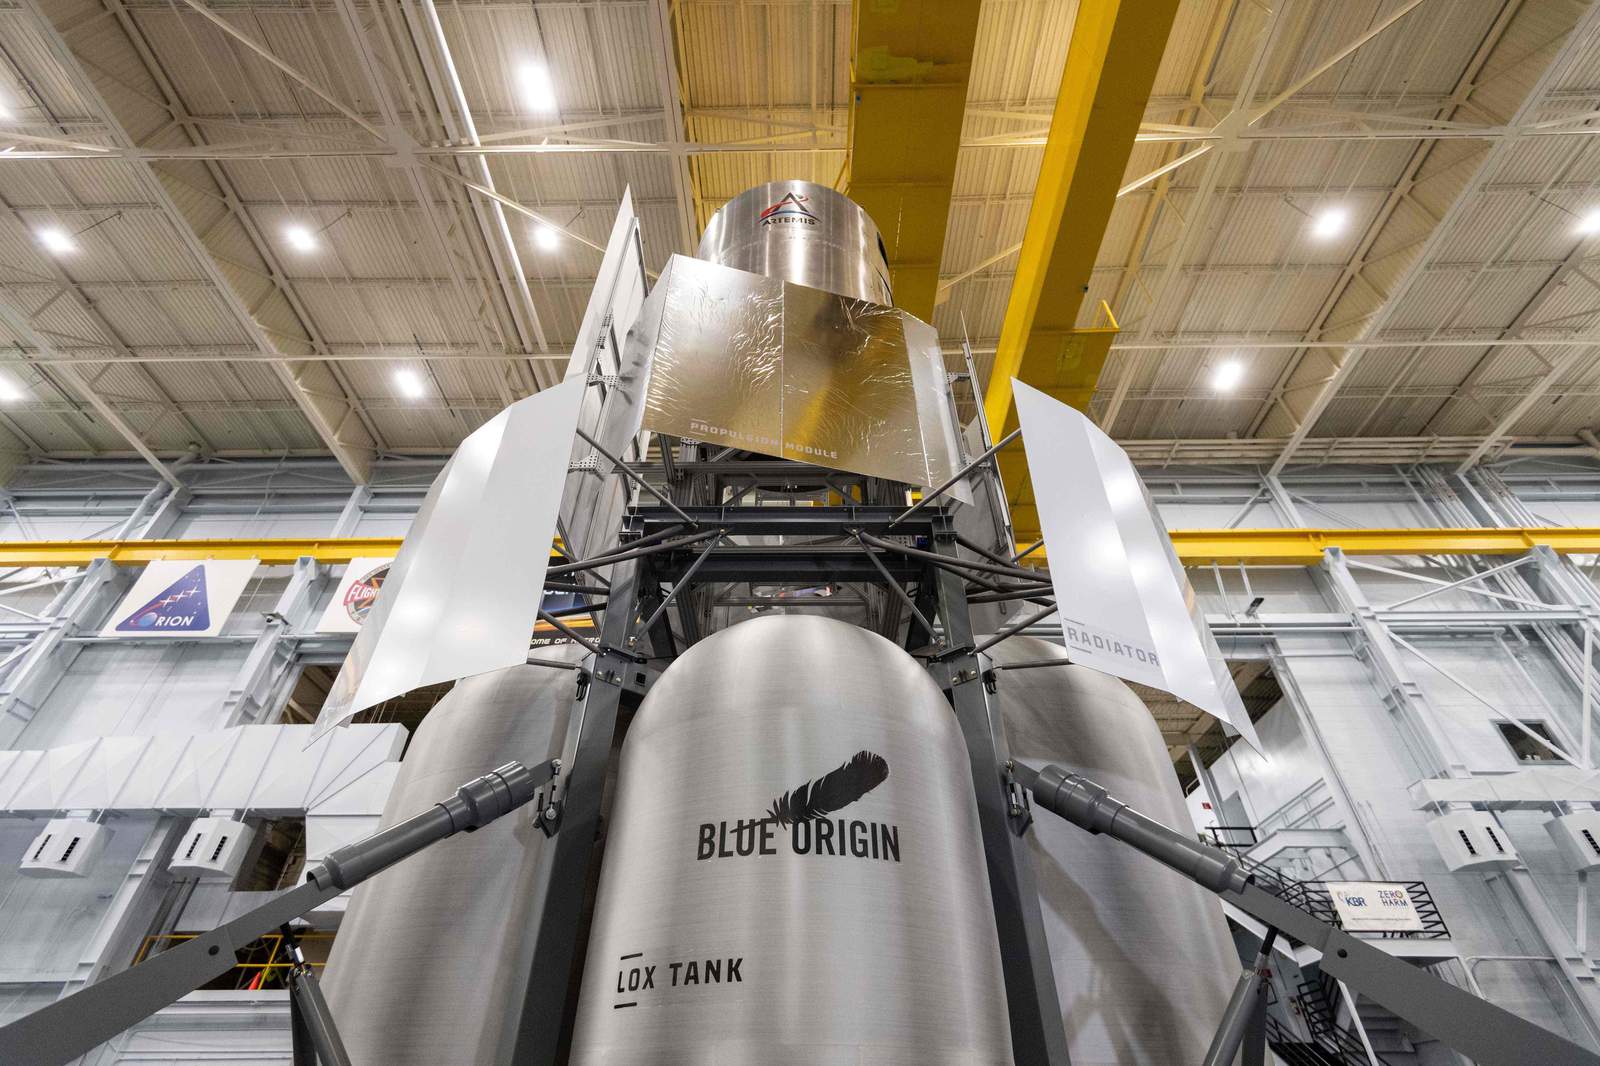 Blue Origin lunar lander arrives in Houston, allowing astronauts chance to try it out